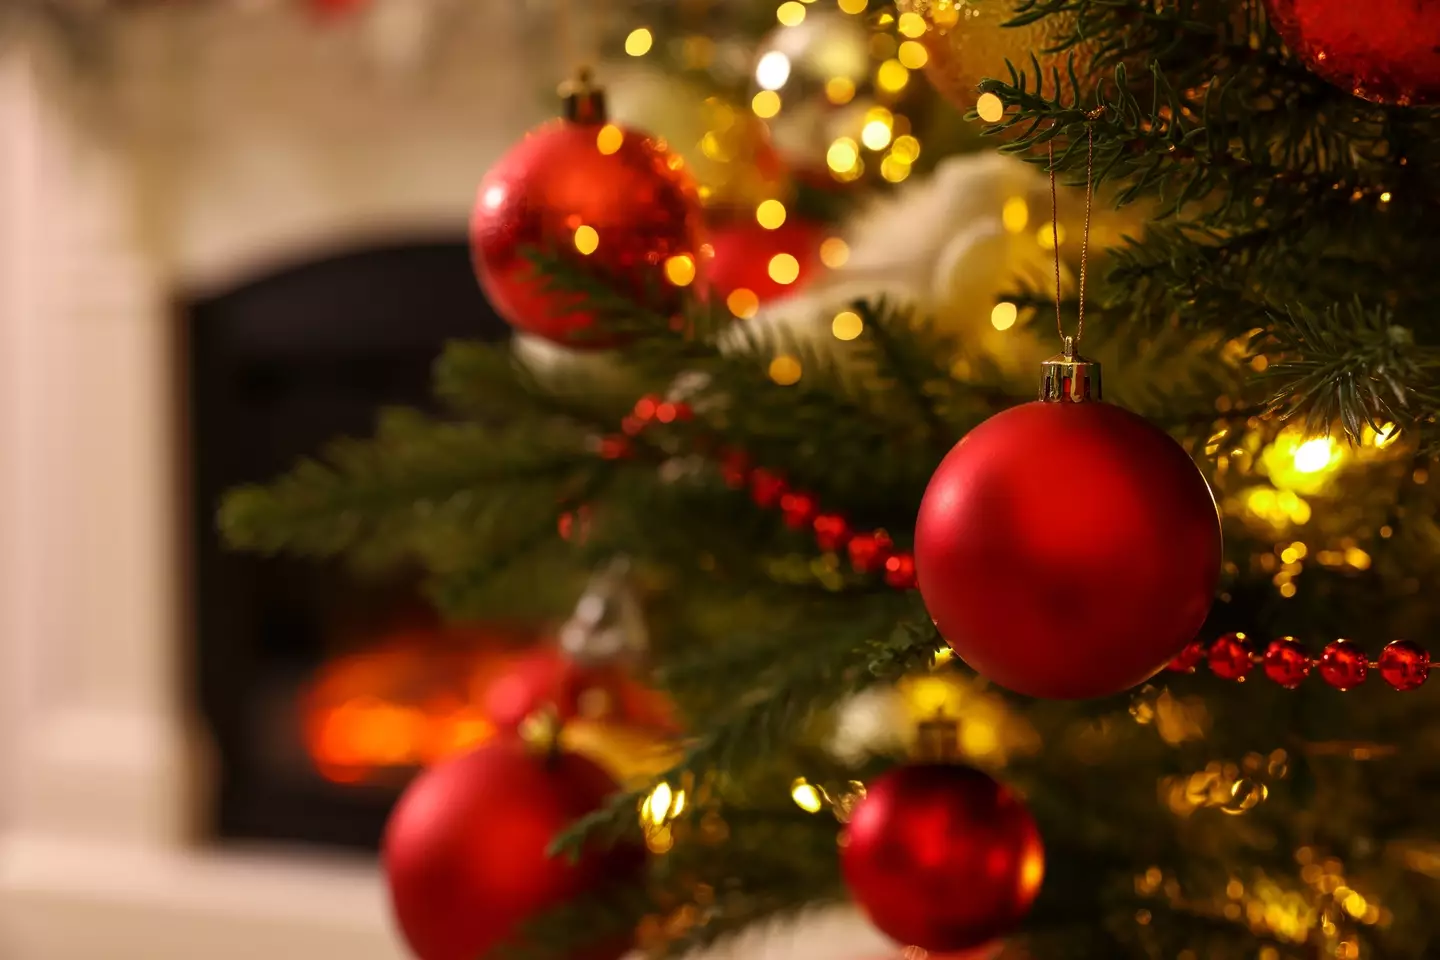 The perfect day to put up your Christmas tree is this Sunday (3 December).